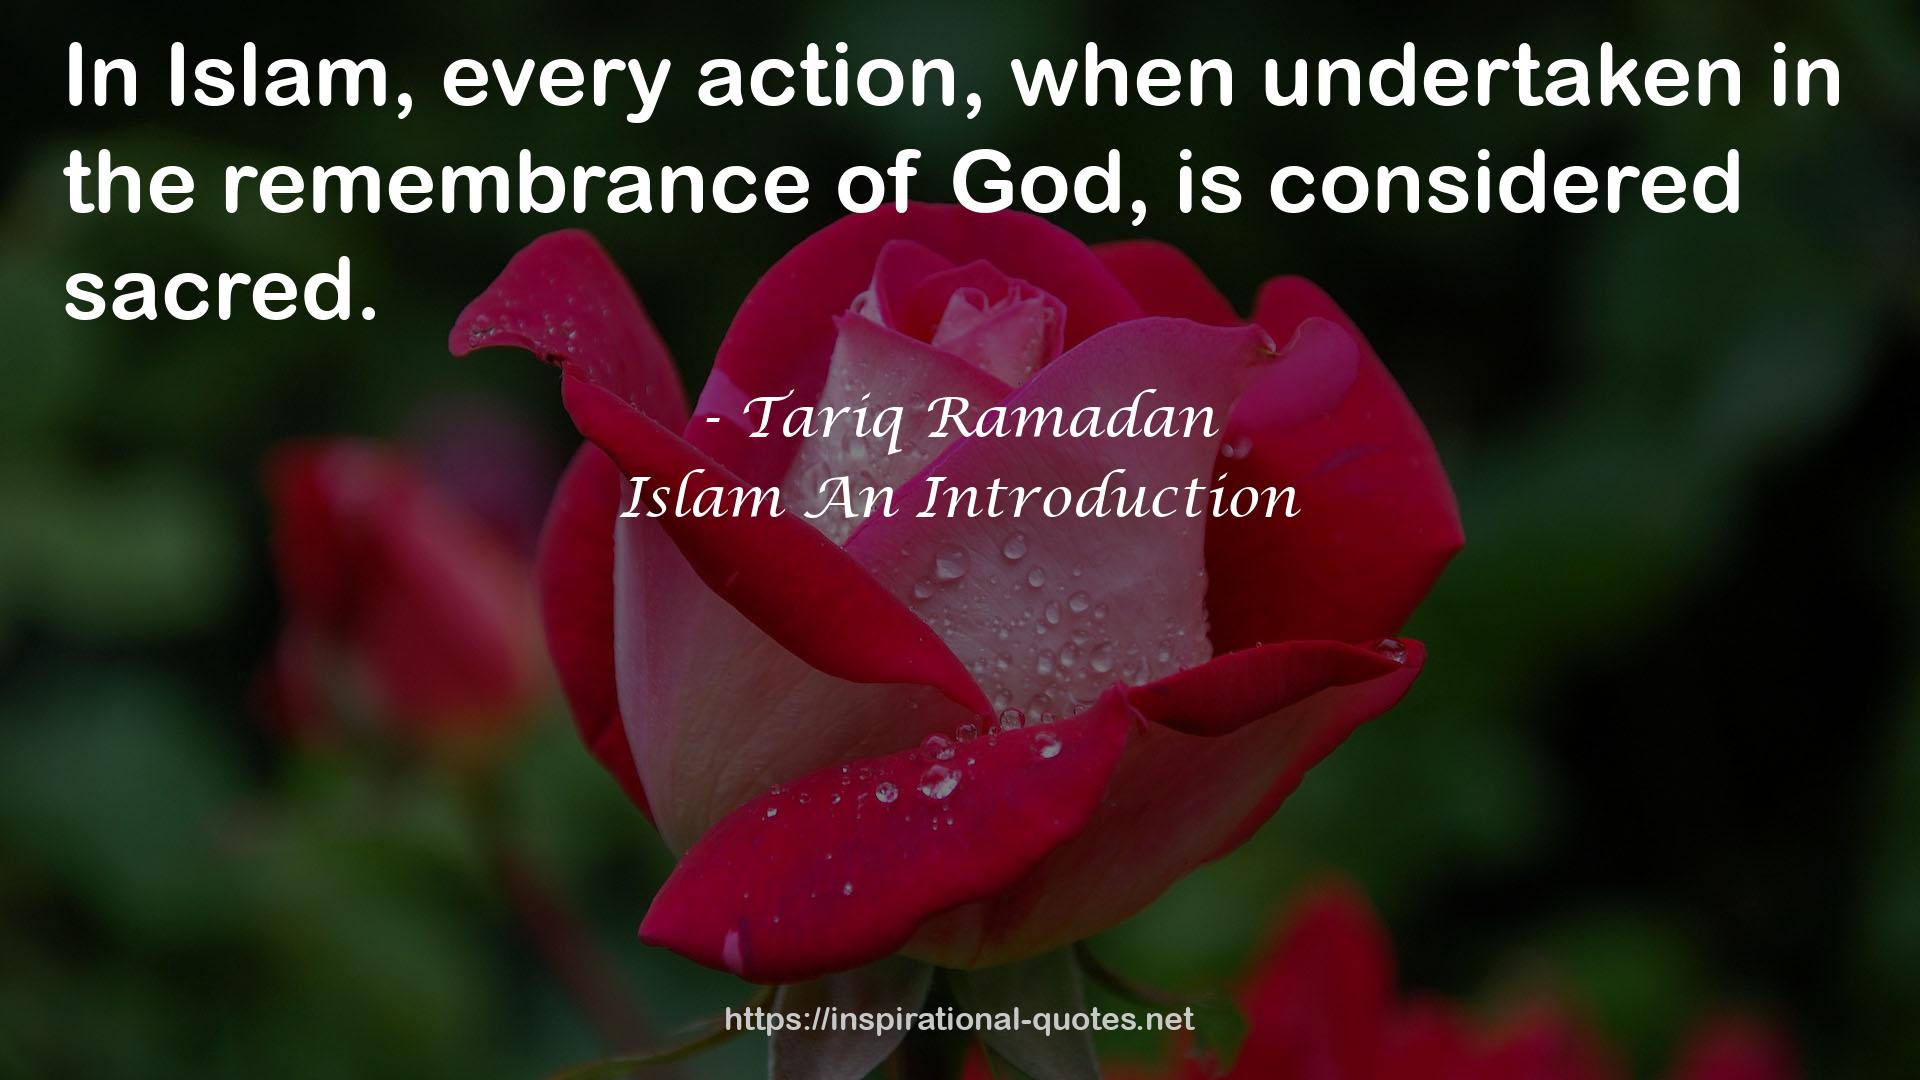 Islam An Introduction QUOTES